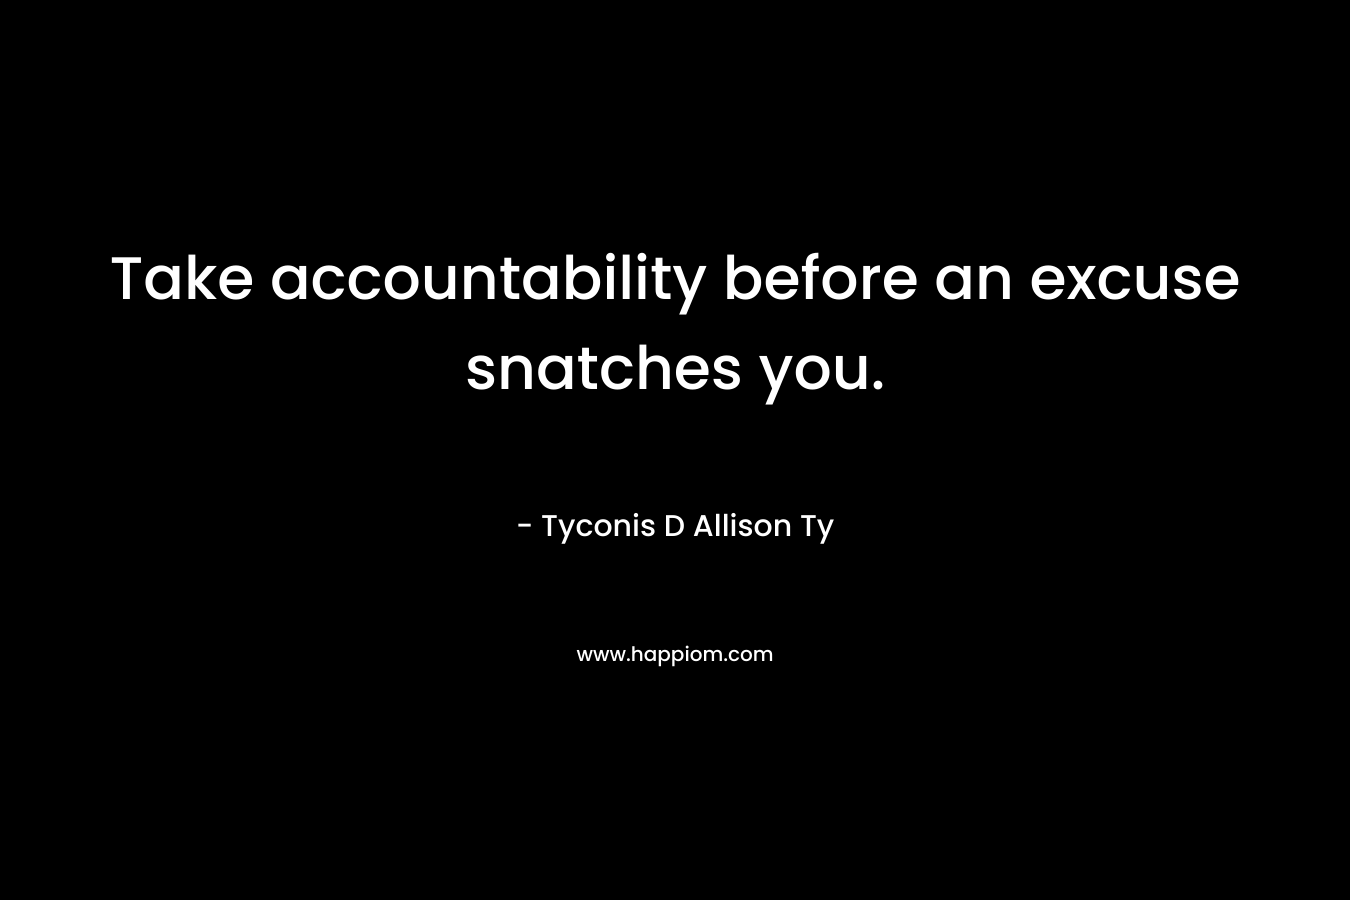 Take accountability before an excuse snatches you.